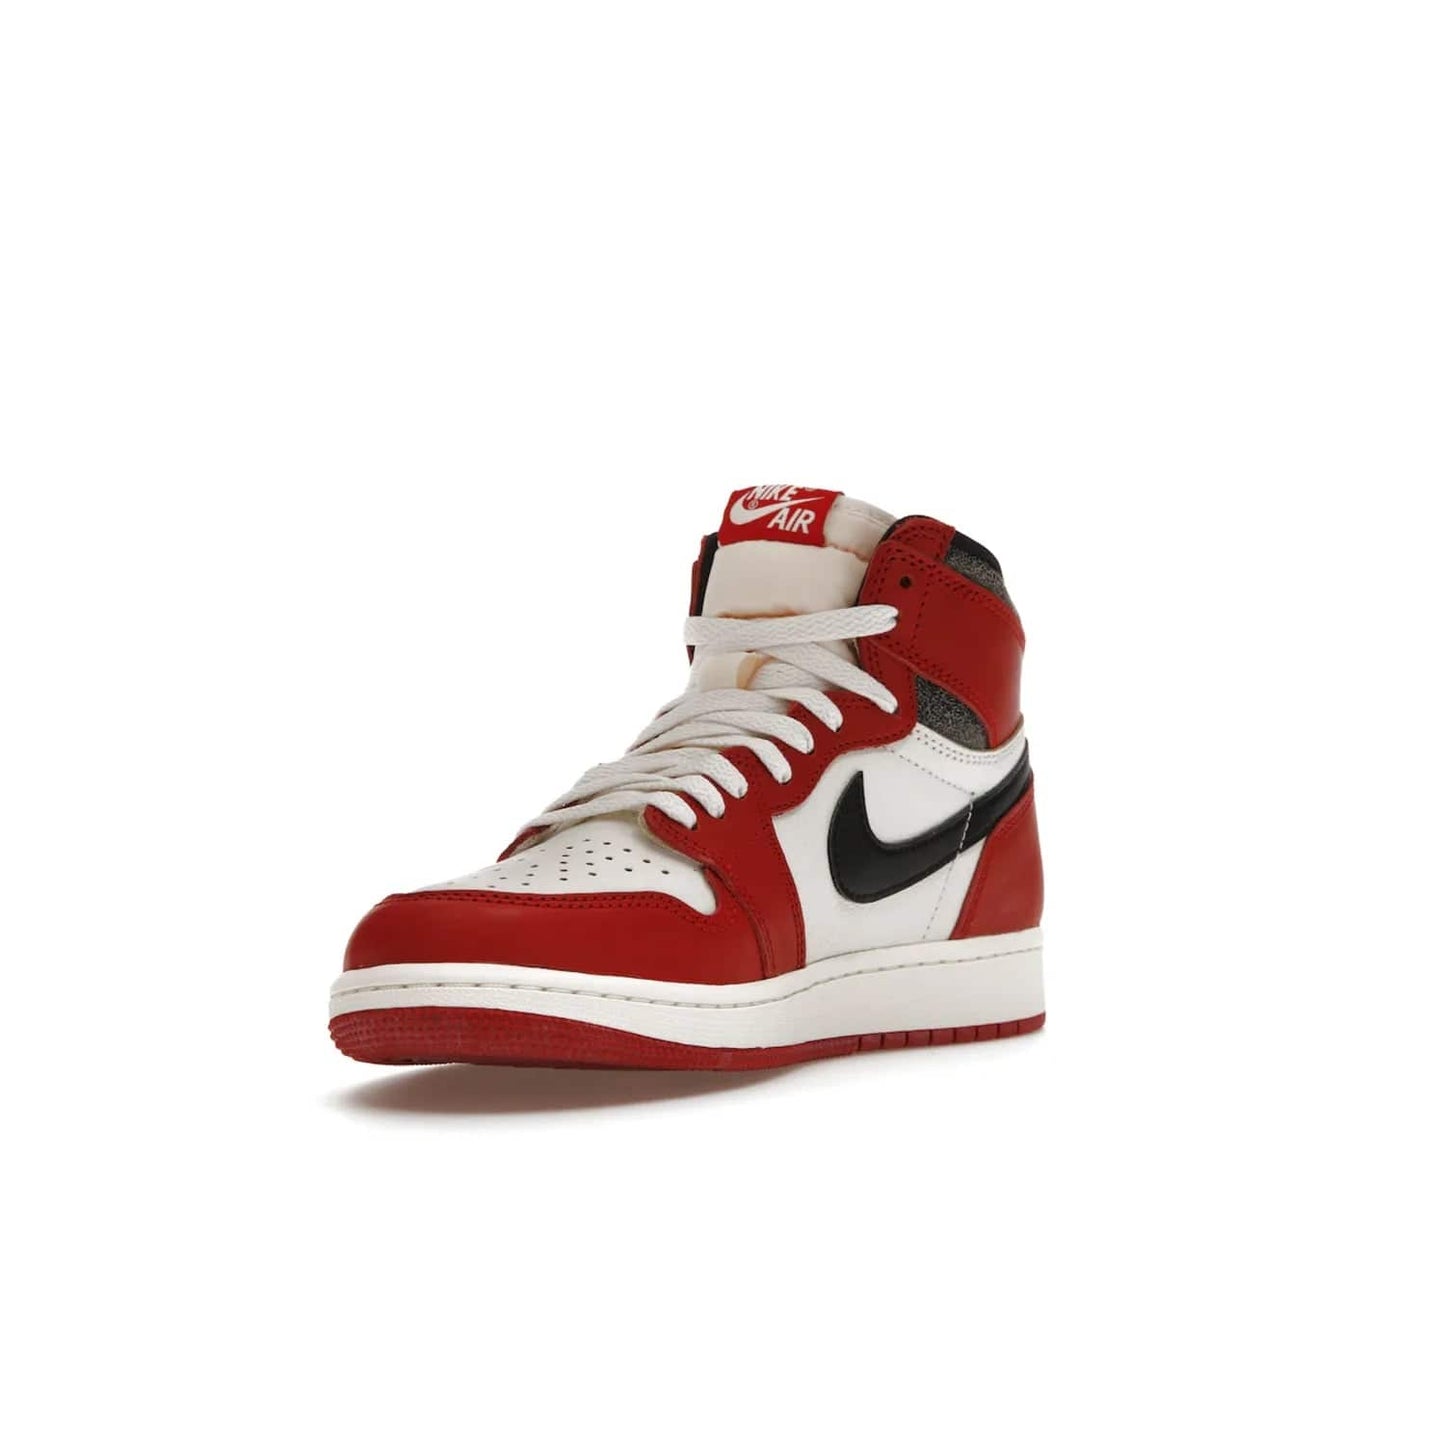 Jordan 1 Retro High OG Chicago Lost and Found (GS) - Image 14 - Only at www.BallersClubKickz.com - Grab the Air Jordan 1 Retro High OG Chicago Reimagined GS, presenting in classic 1985 silhouette. Varsity Red, Black, Muslin and Sail hues, featuring Nike Air branding, Wings on the collars and printed insoles. Don't miss out when it releases 19th Nov 2022.